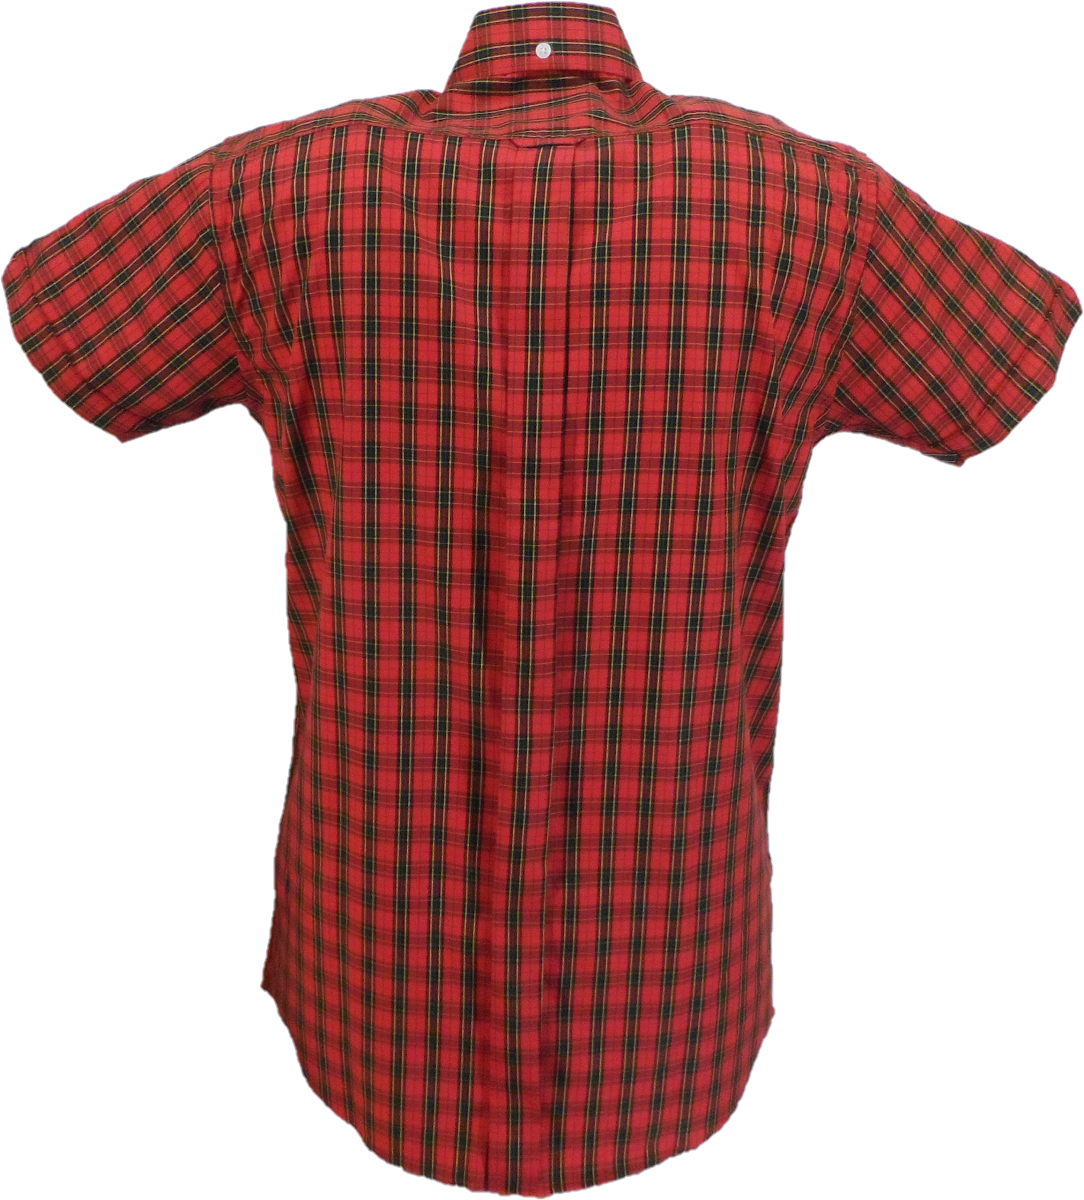 Relco Red Tartan 100% Cotton Short Sleeved Vintage Retro Mod Button Down Shirts